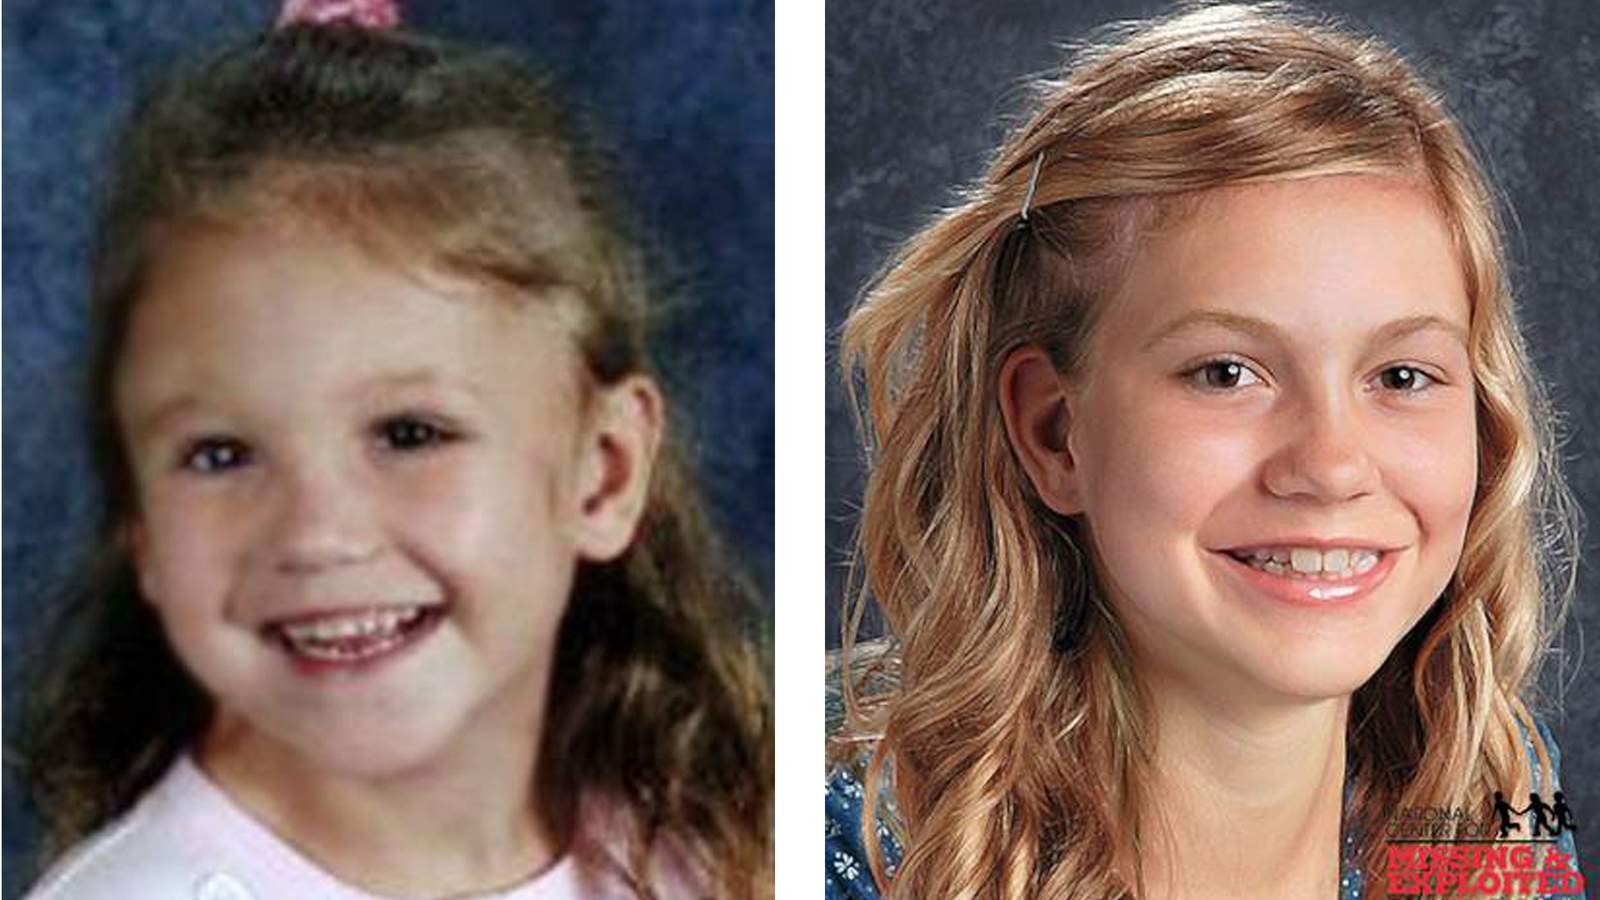 11 years later: Still no trace of HaLeigh Cummings